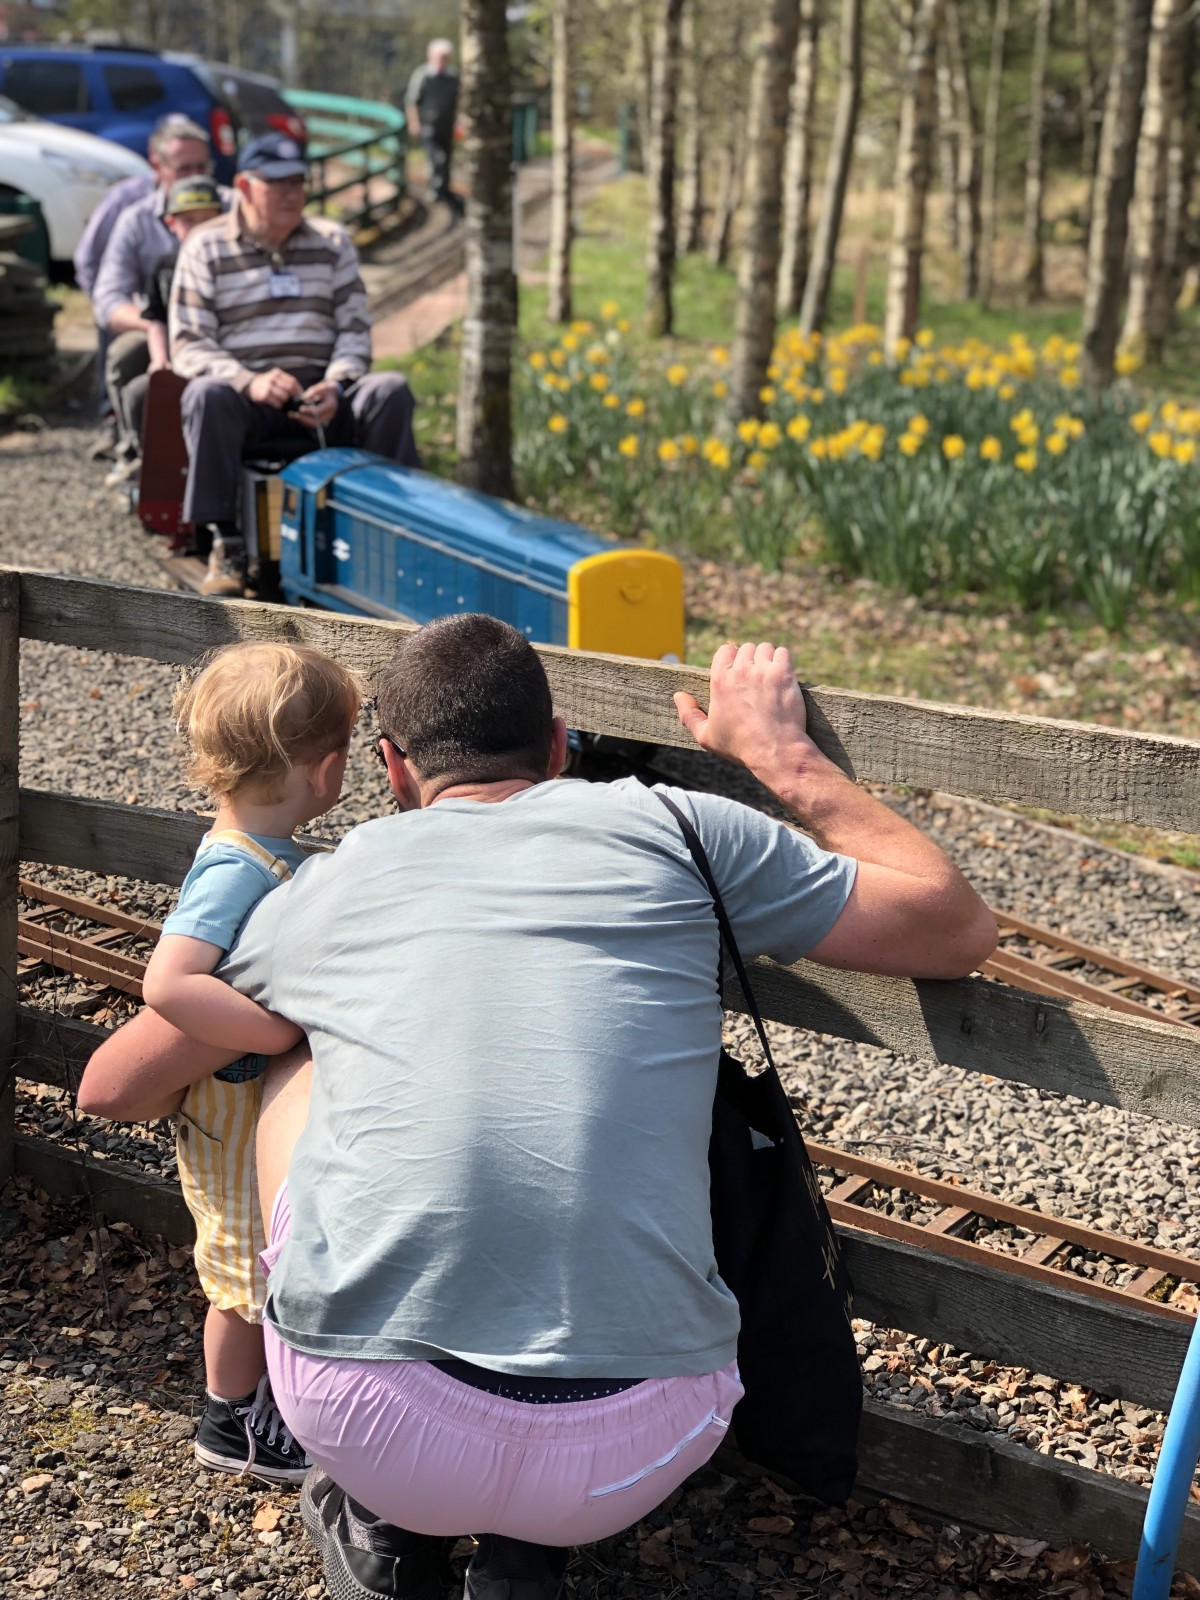 A little boy and his daddy peep through the fence to watch the oncoming train at Wester Pickston Railway, Methven, Perthshire